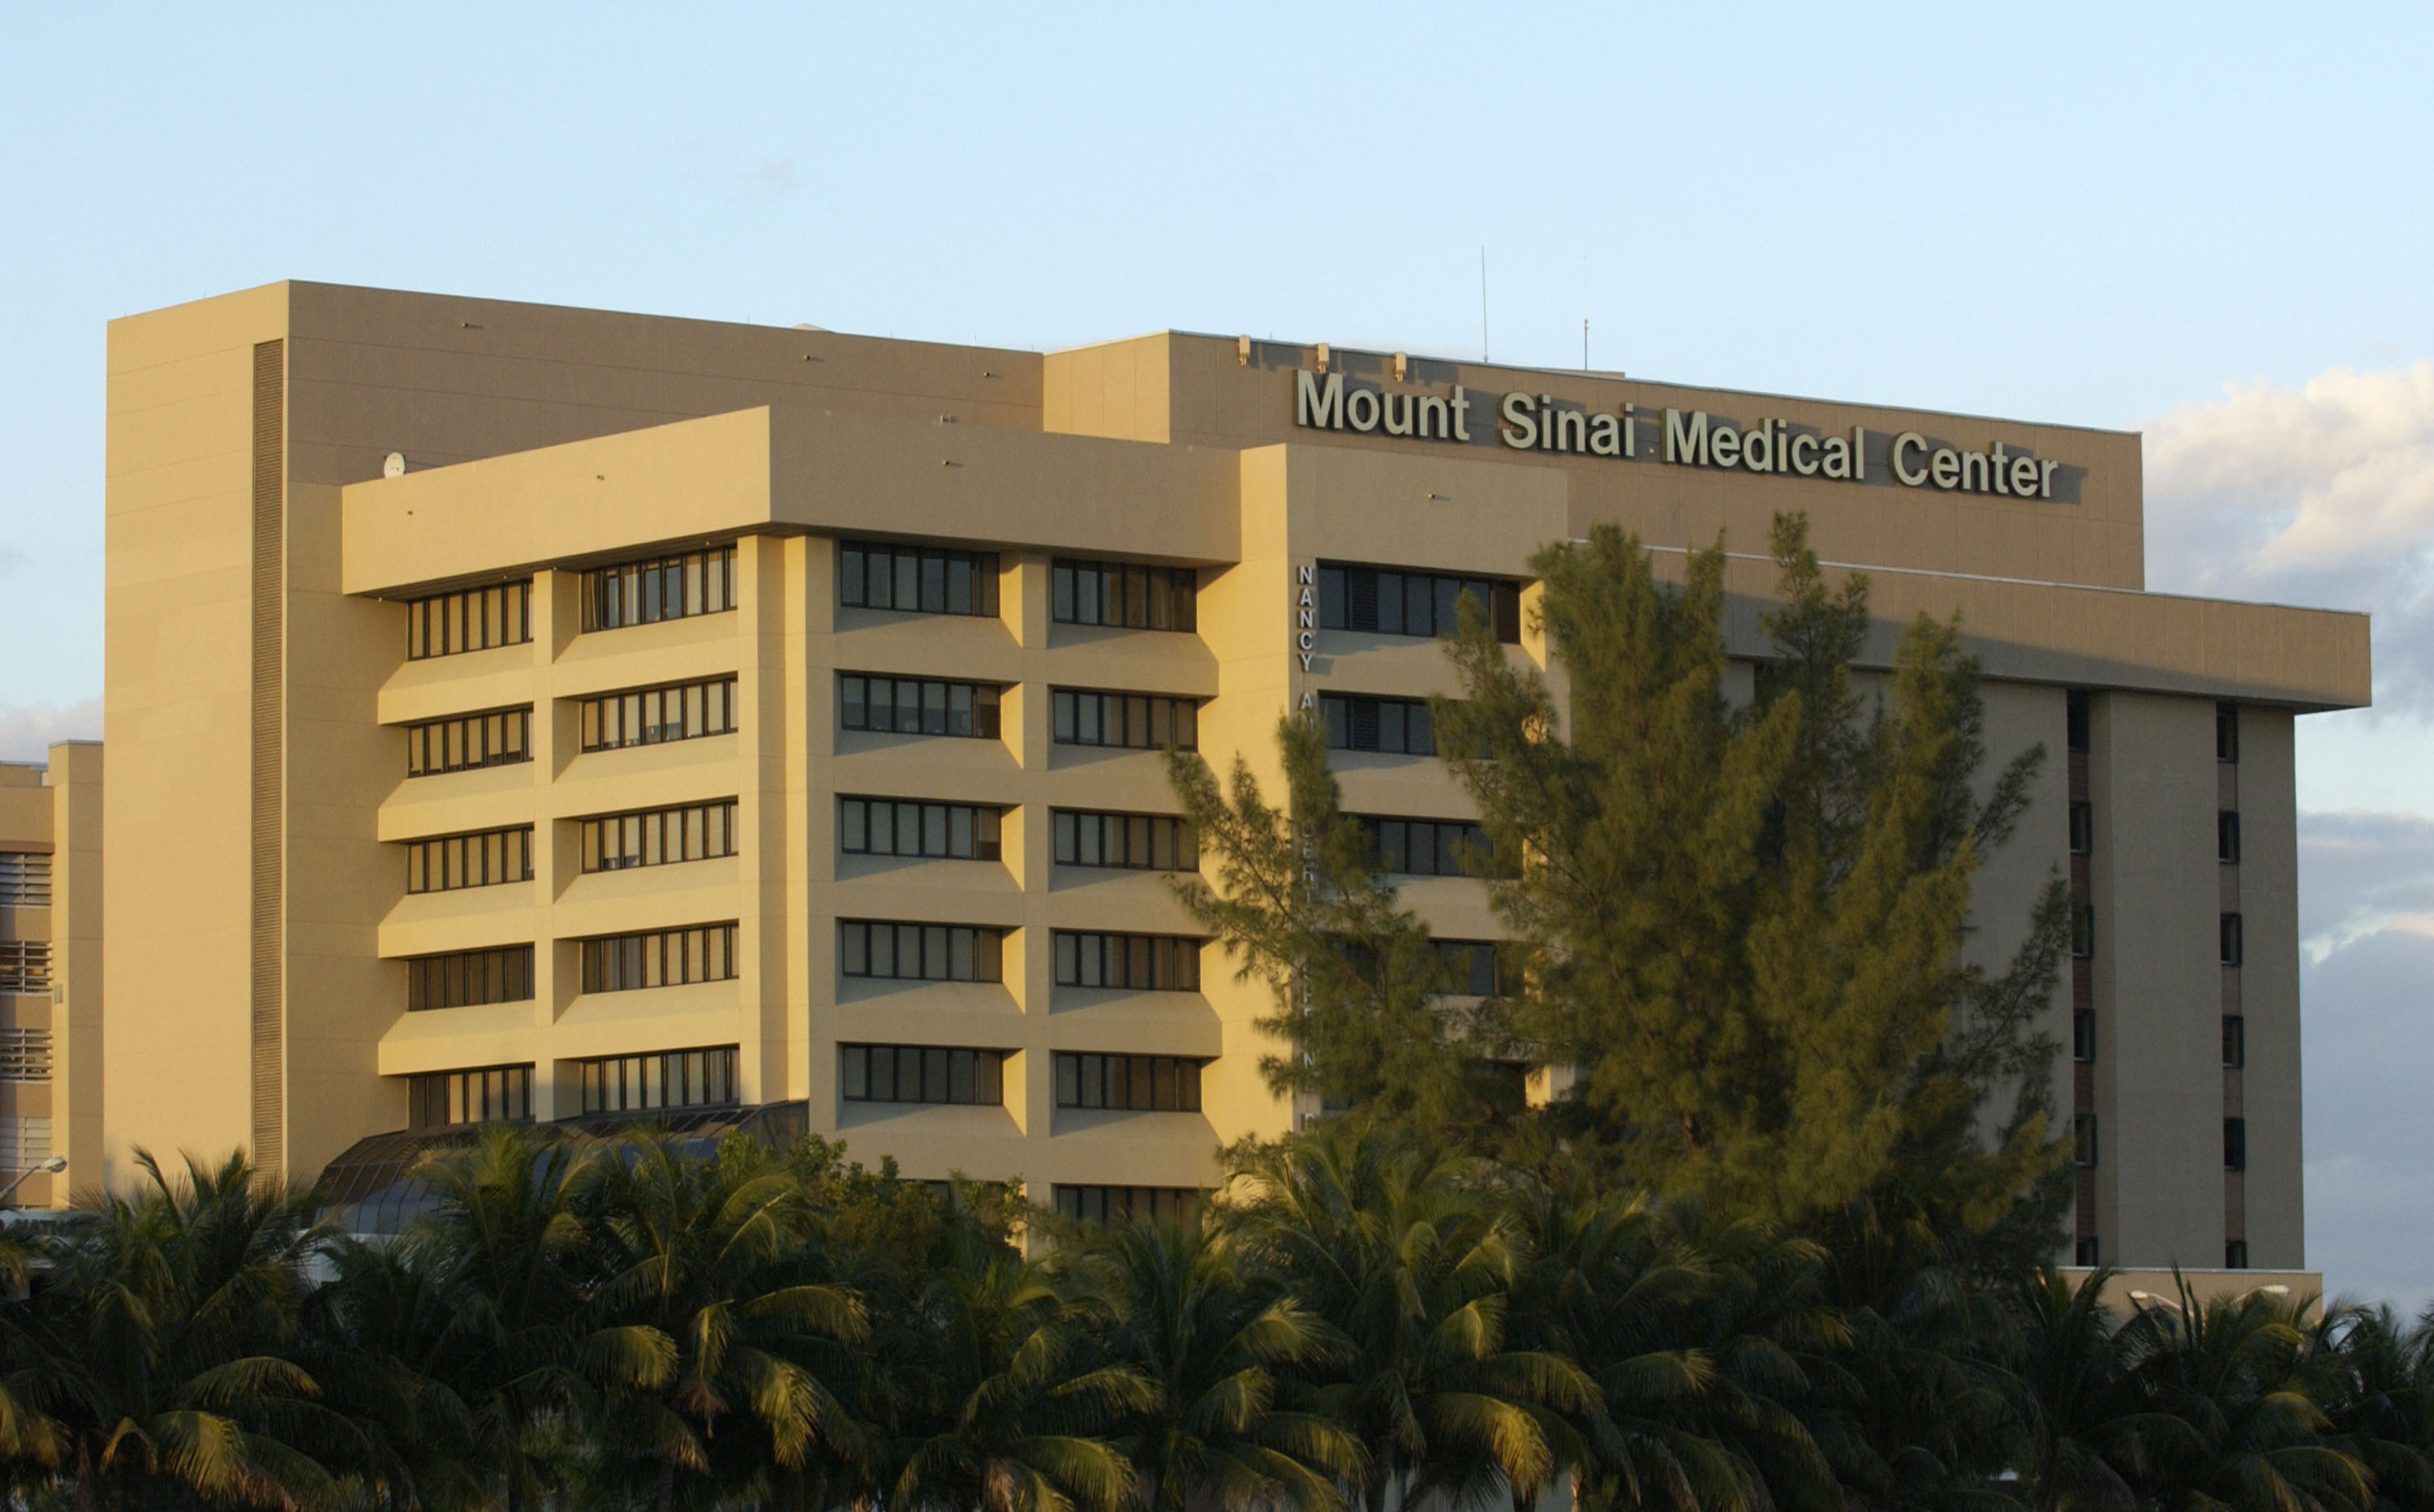 Mount Sinai Medical Center, where Maurice Gibb was taken on January 11, 2003 in Miami Beach, Florida. | Source: Getty Images